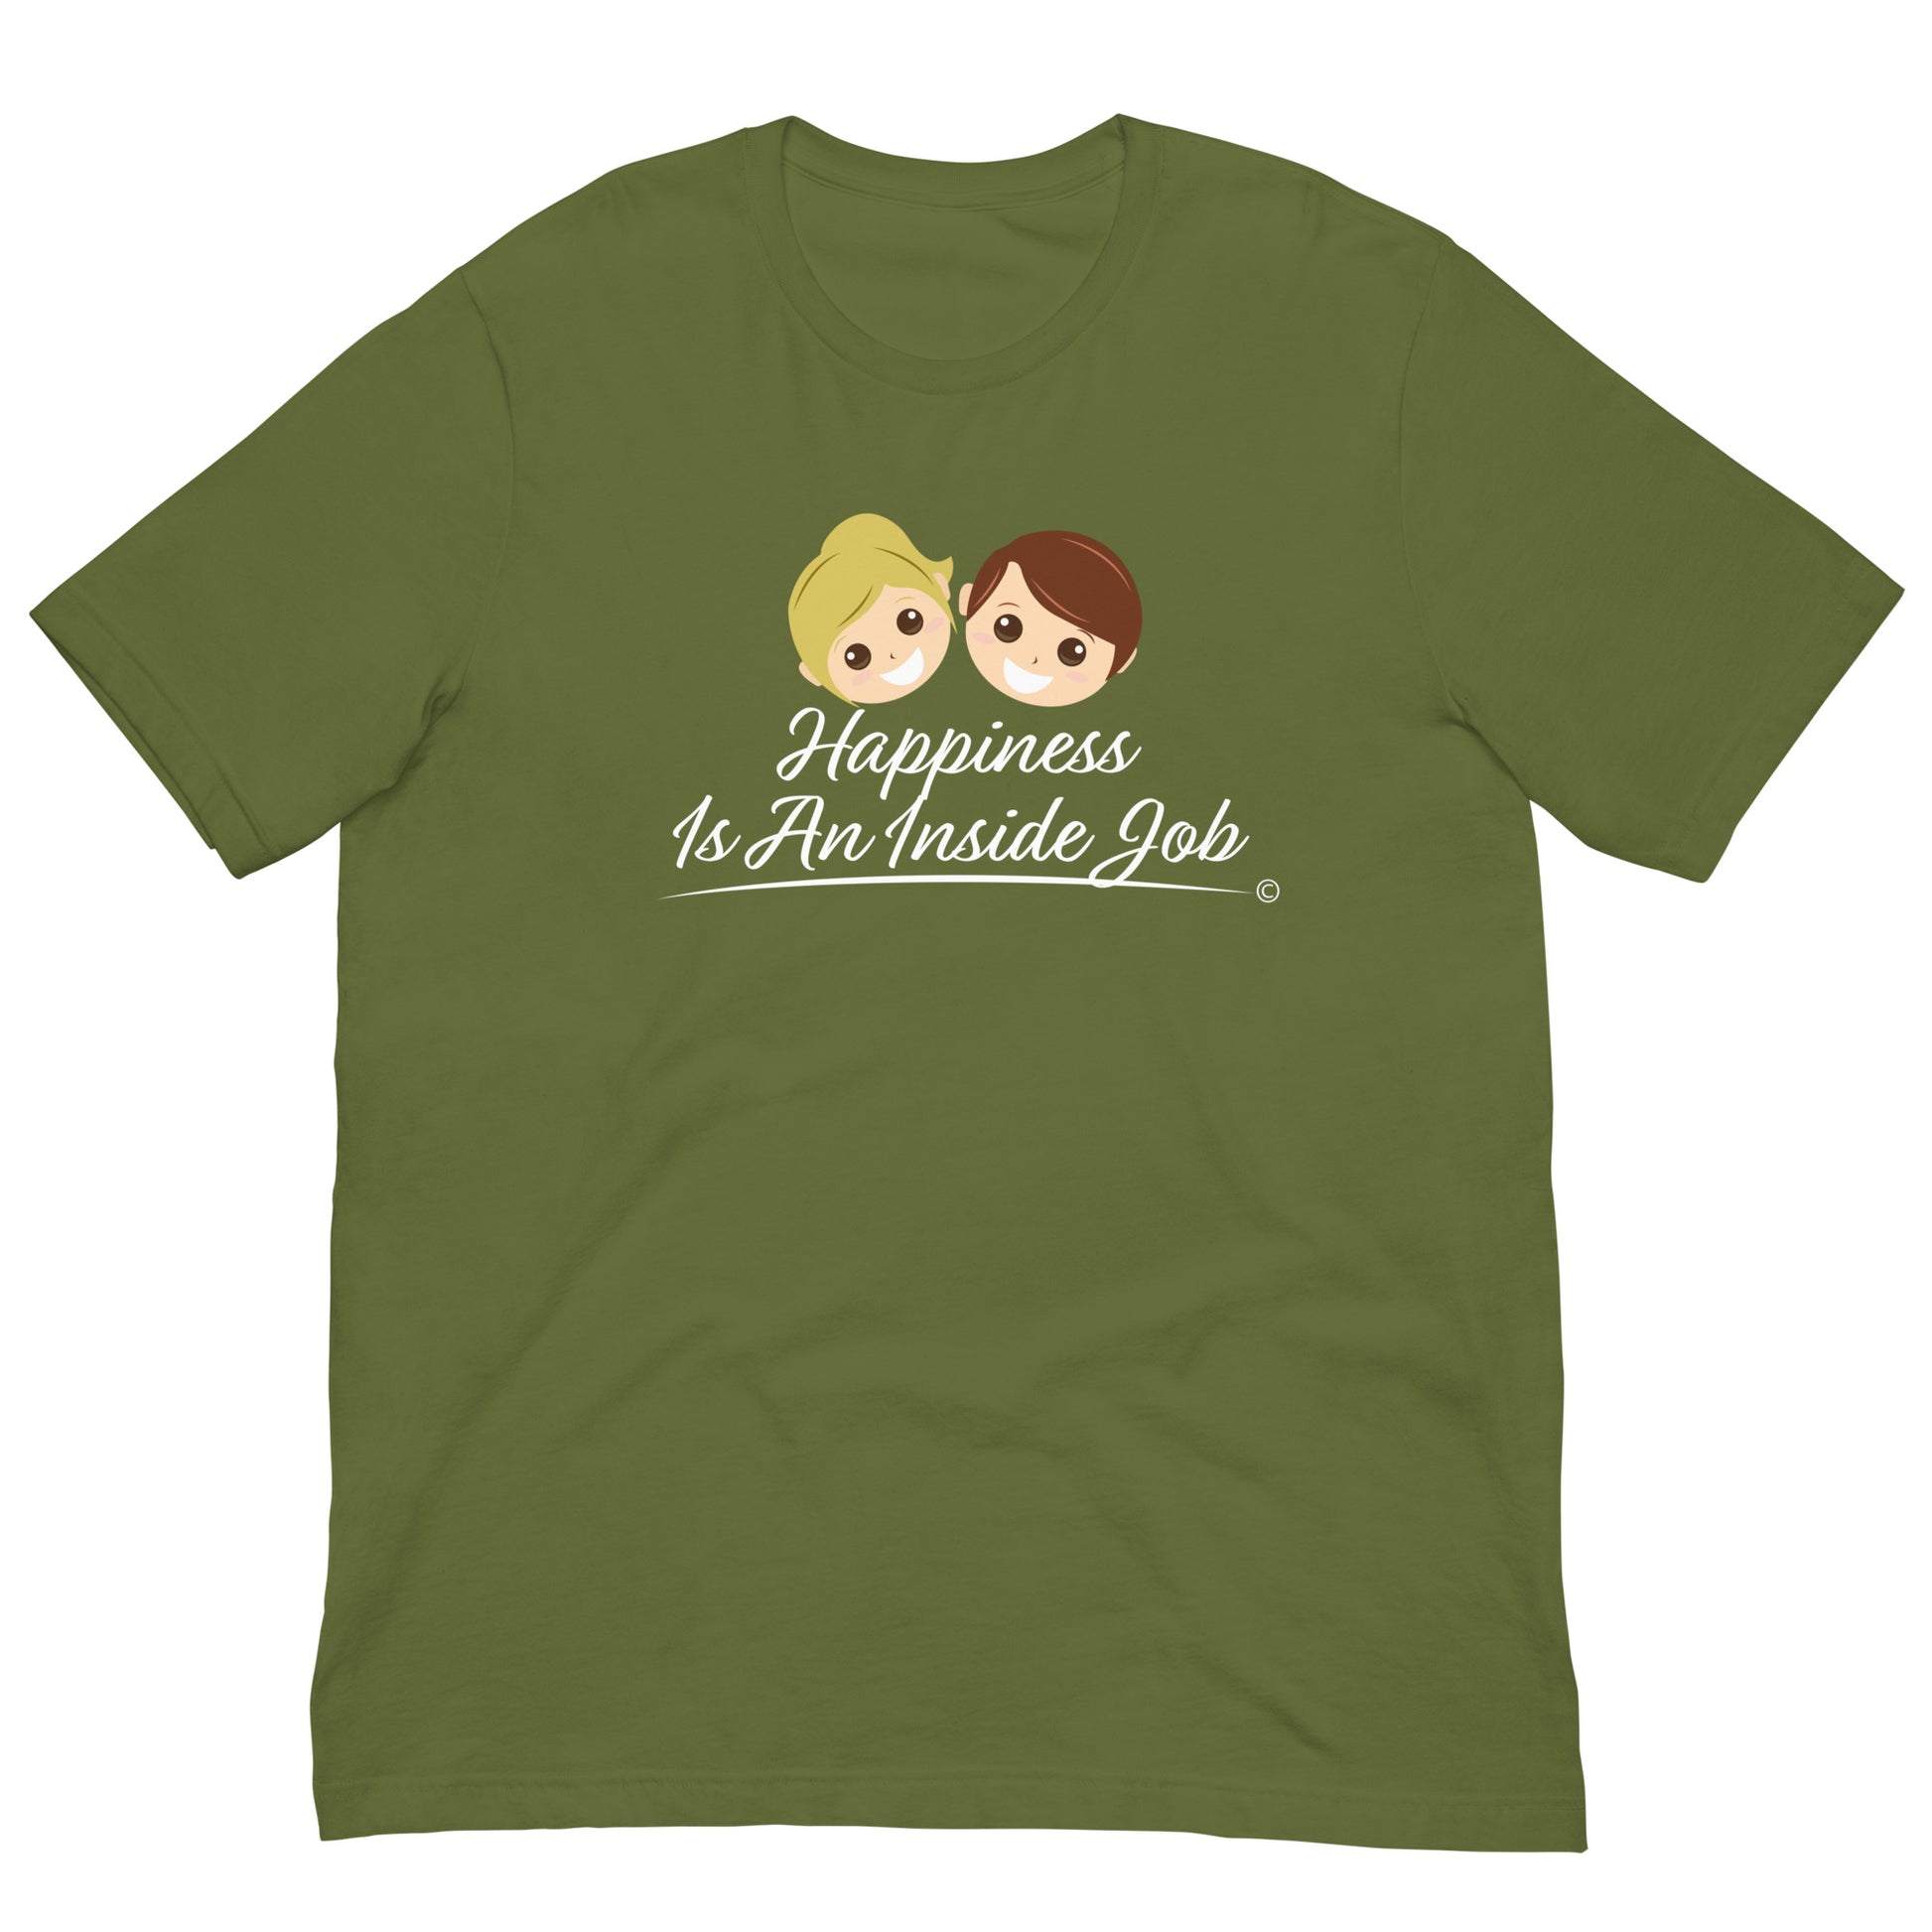 Short-sleeve shirt for adults -Olive